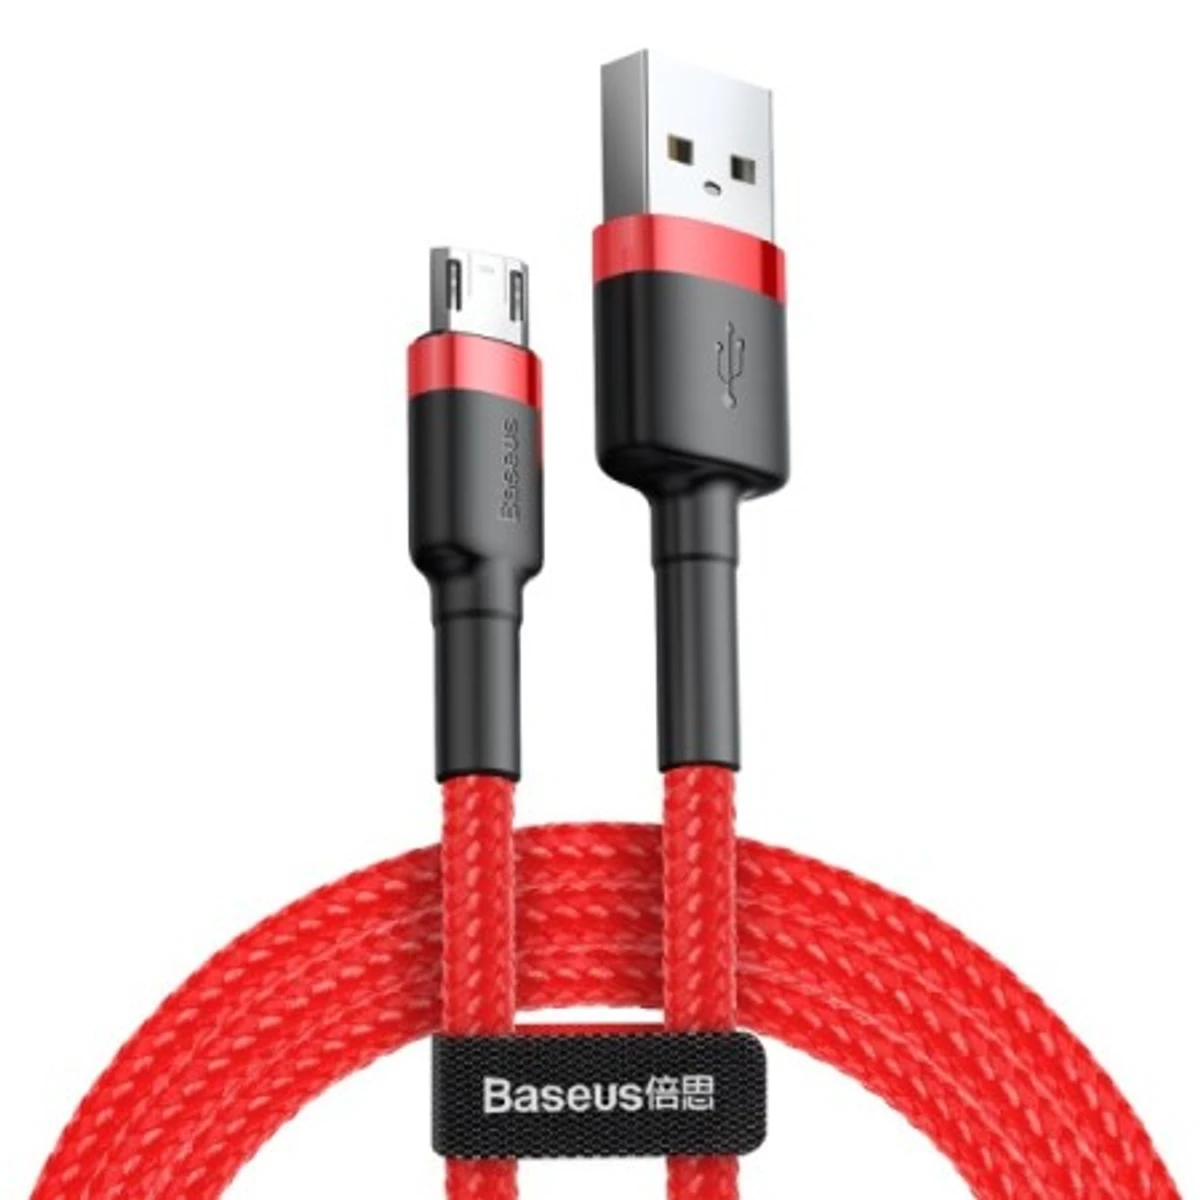 Baseus Reversible Micro usb charging cable for Android